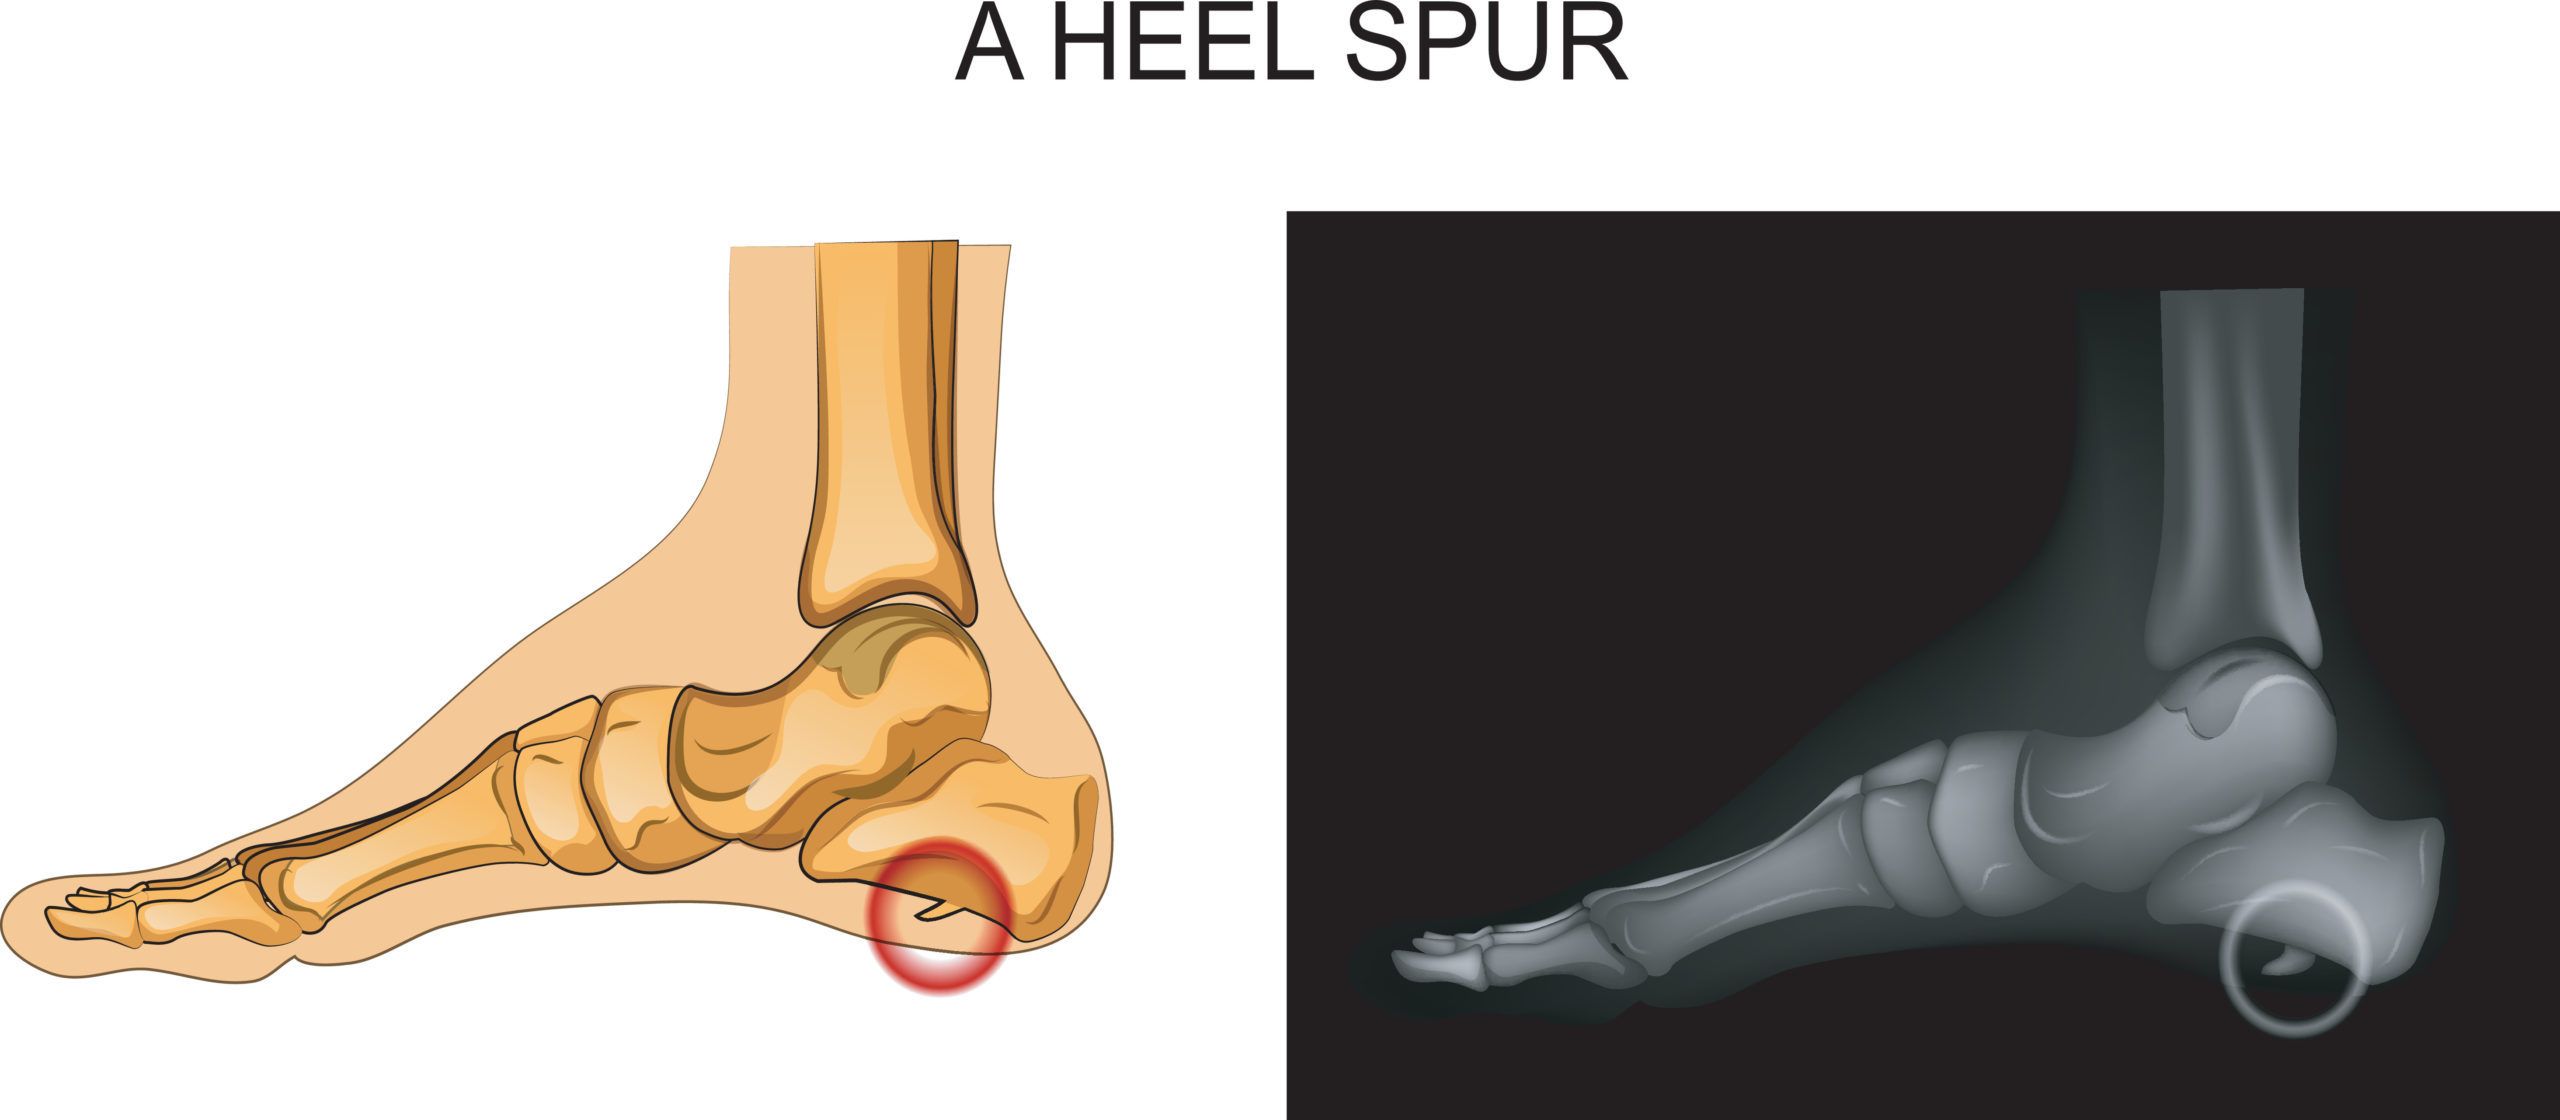 Can You Remove a Heel Spur? Heel Spur Surgery 101 | Northwest Surgery Center